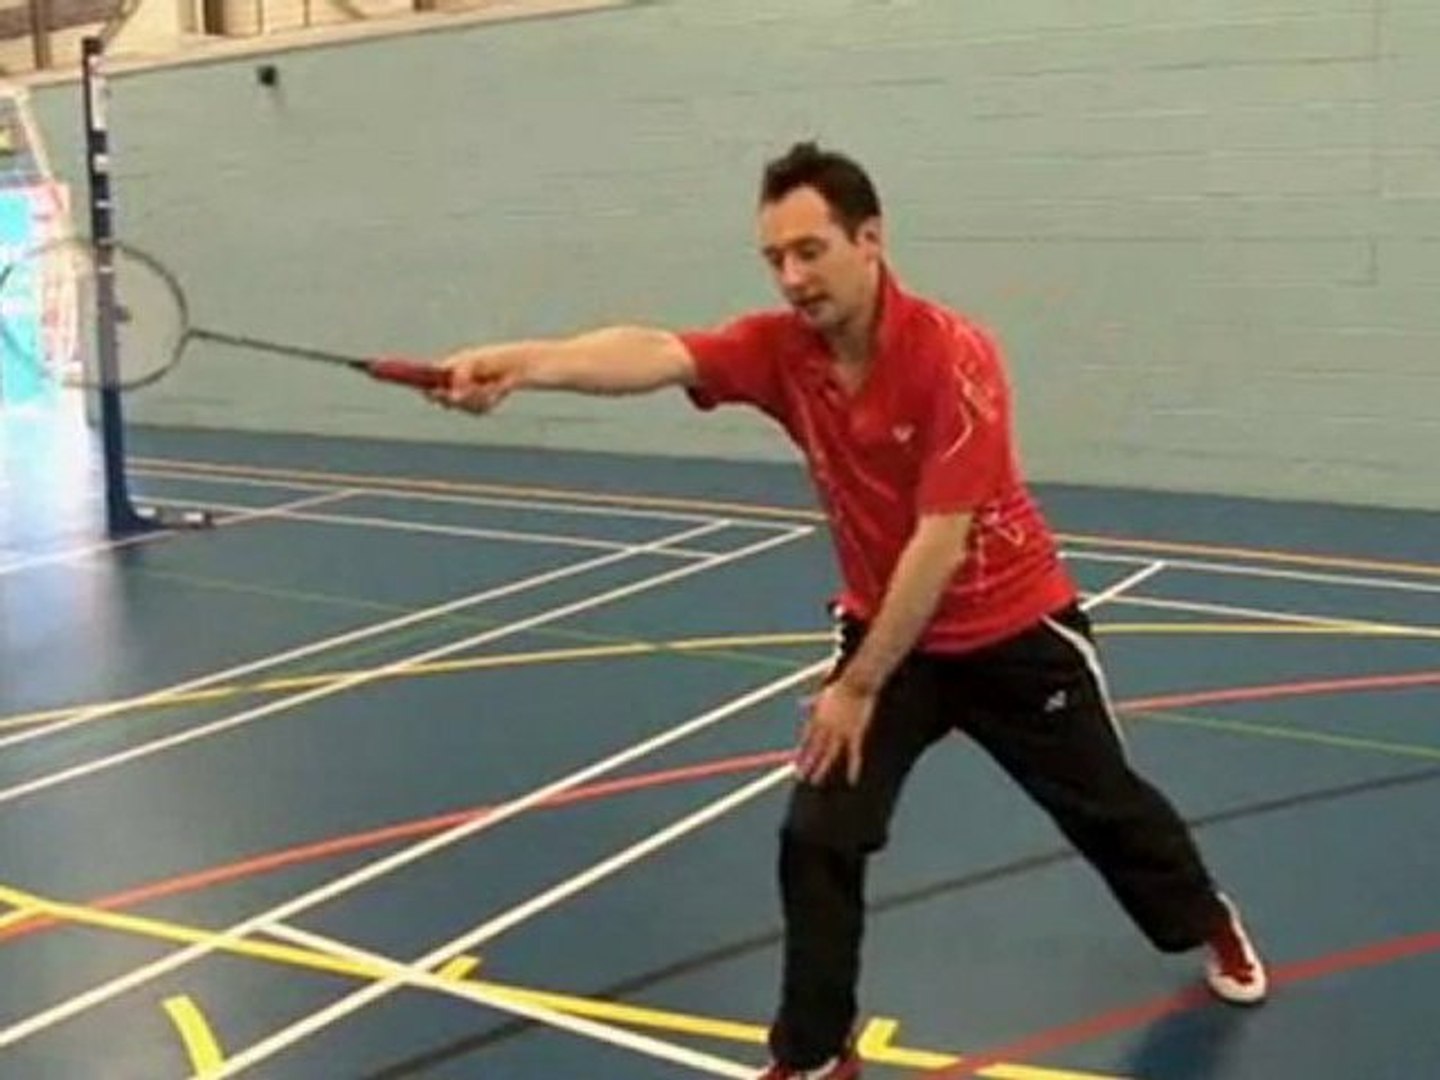 How To Play A Badminton Lob - video Dailymotion